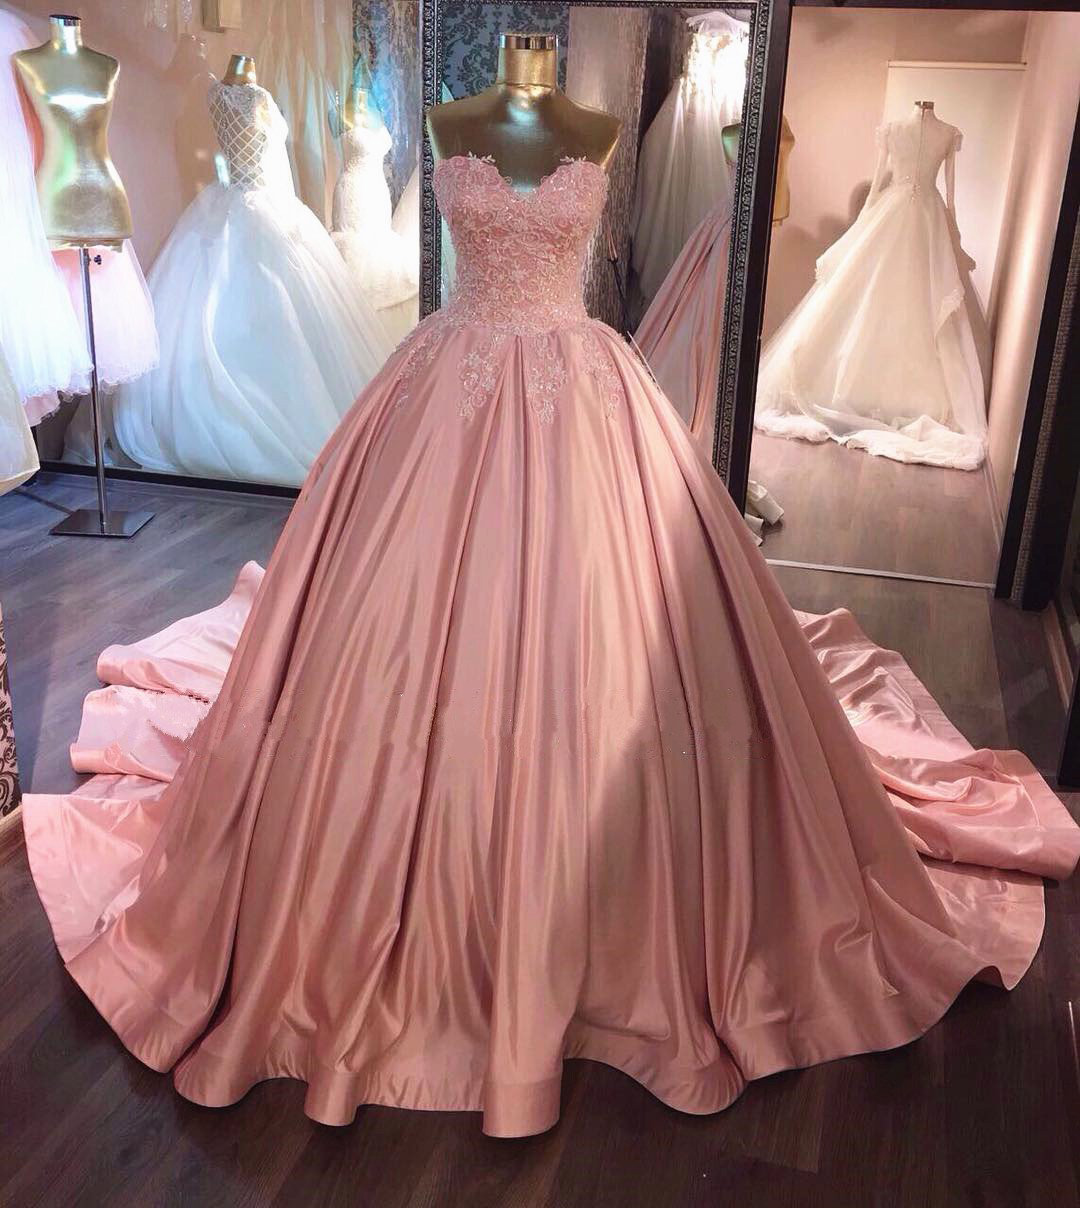 Unique Pink Sweetheart Sleeveless Lace Appliques Ball Gown Prom Dresses,sweet 16 Dress,quinceanera Dresses,p106